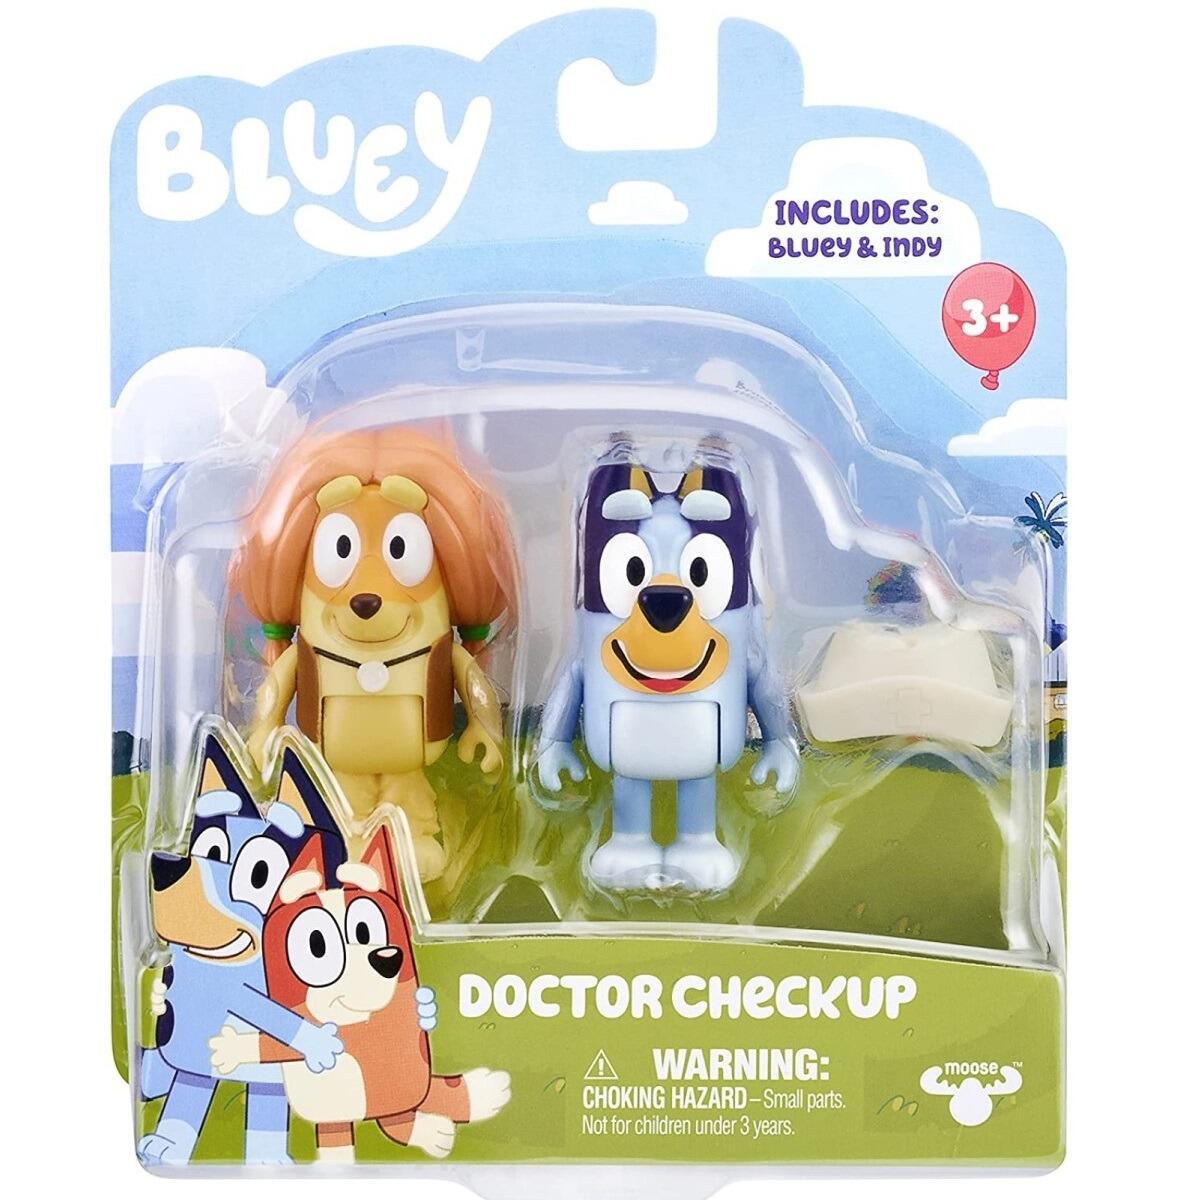 Bluey 2 Figure Pack - Doctor Checkup Bluey & Indy